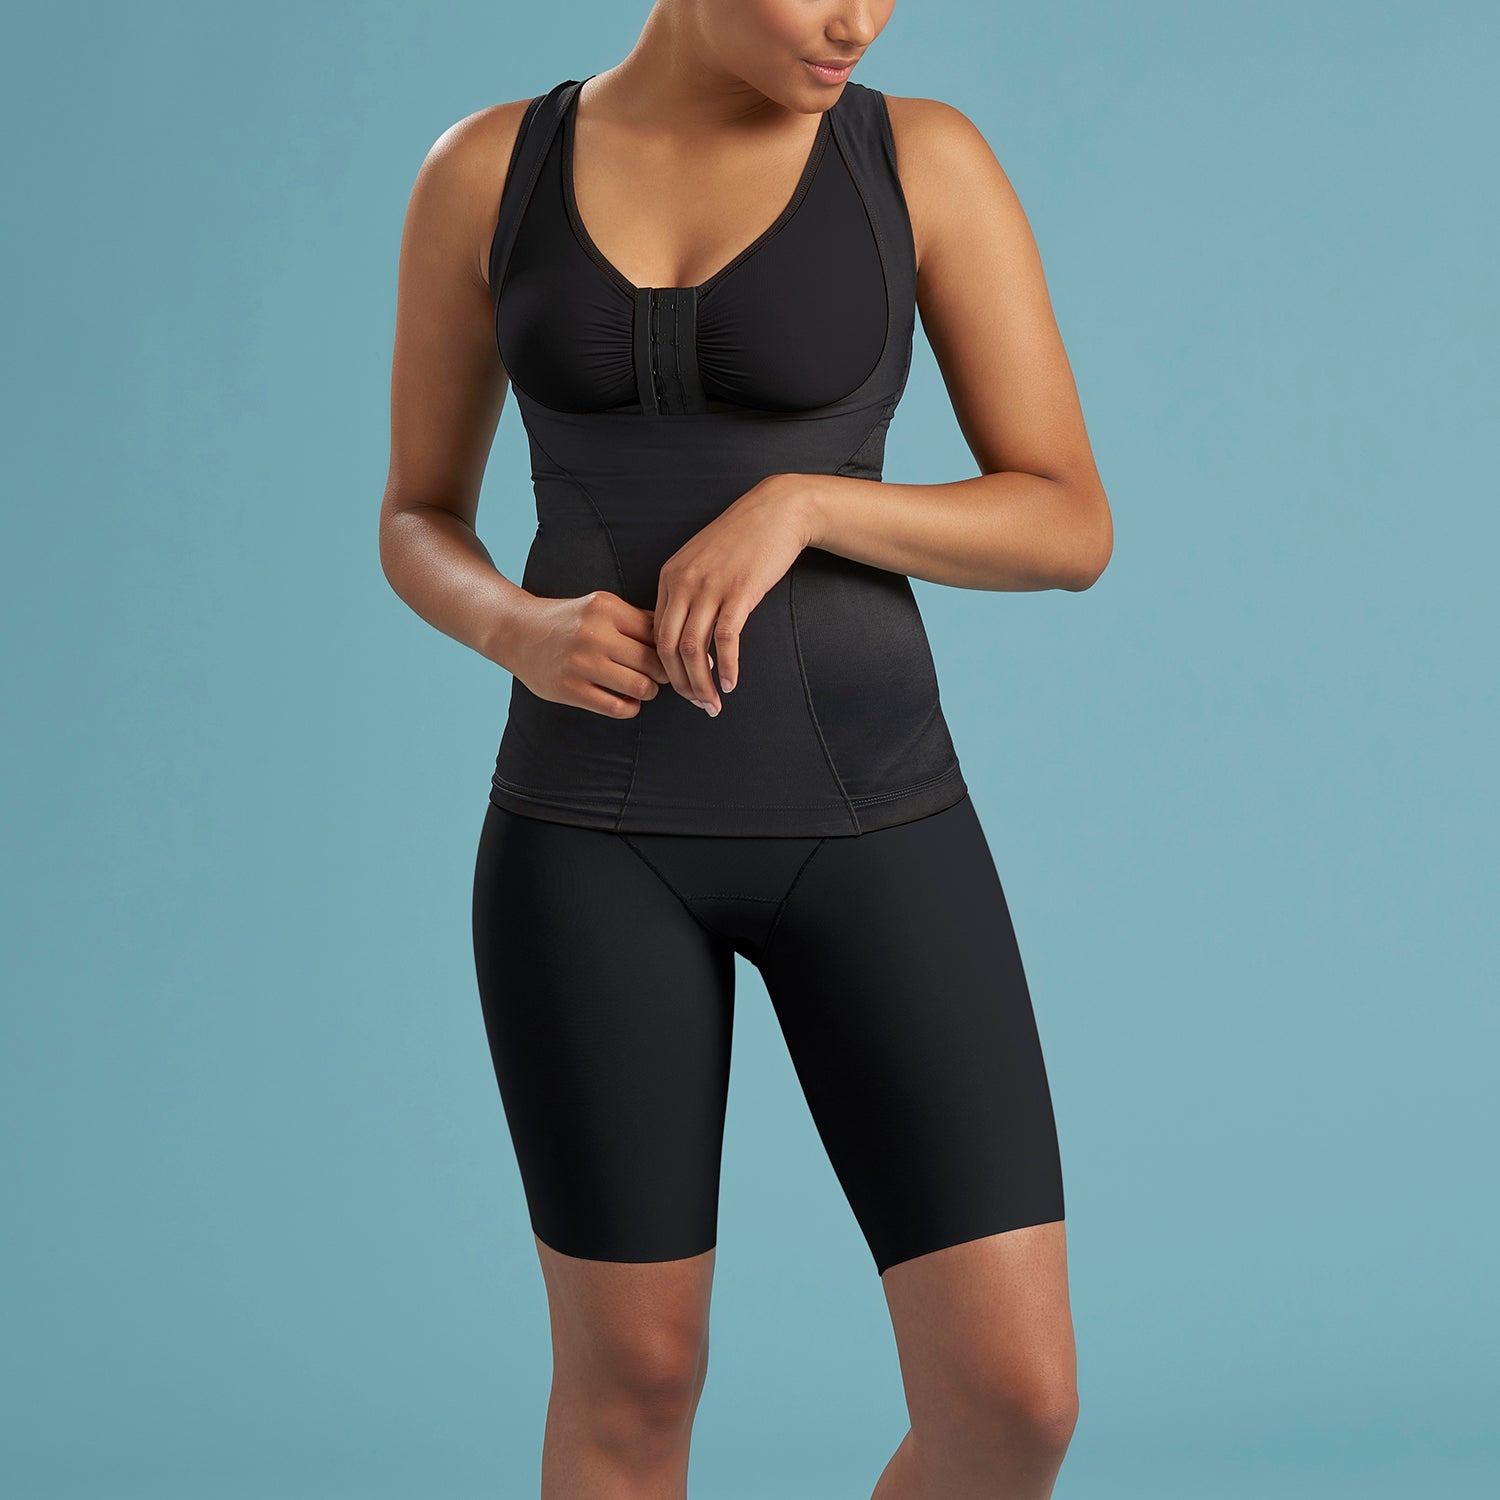 Buy online Black Poly Spandex Shaper Camisoles Shapewear from